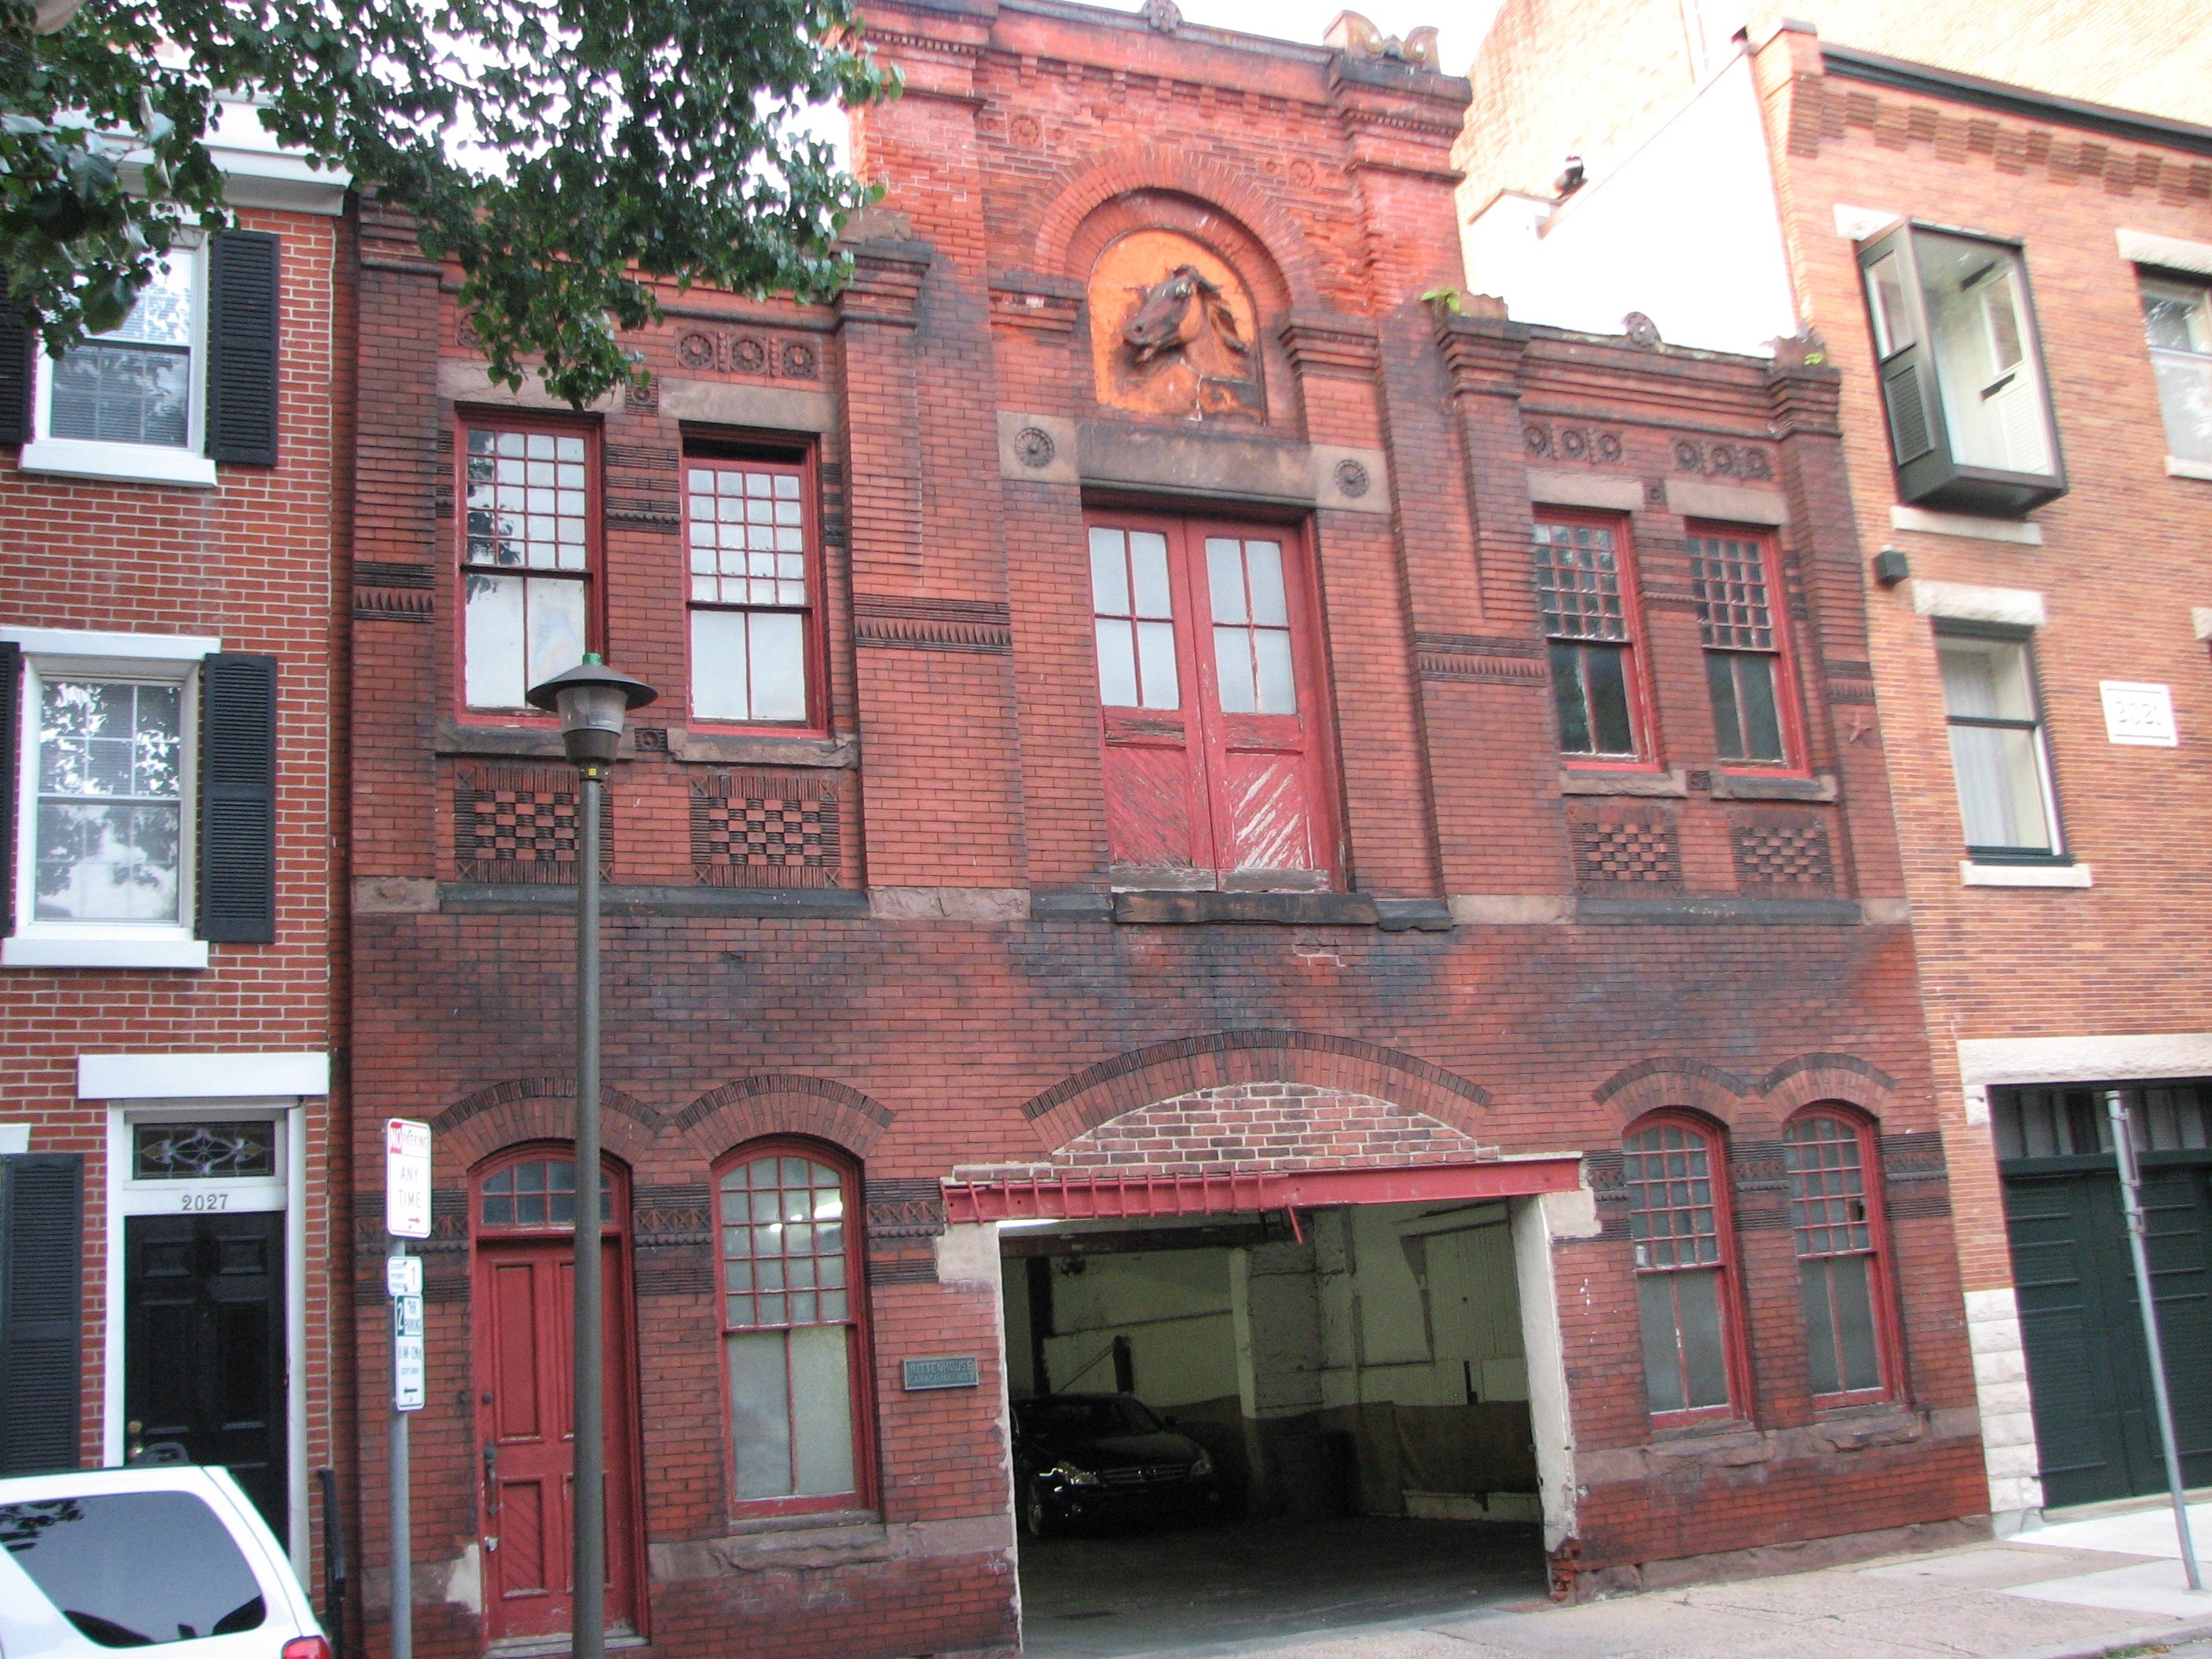 The beautiful former stable and carriage house at 2023-2025 Rittenhouse is now a garage.